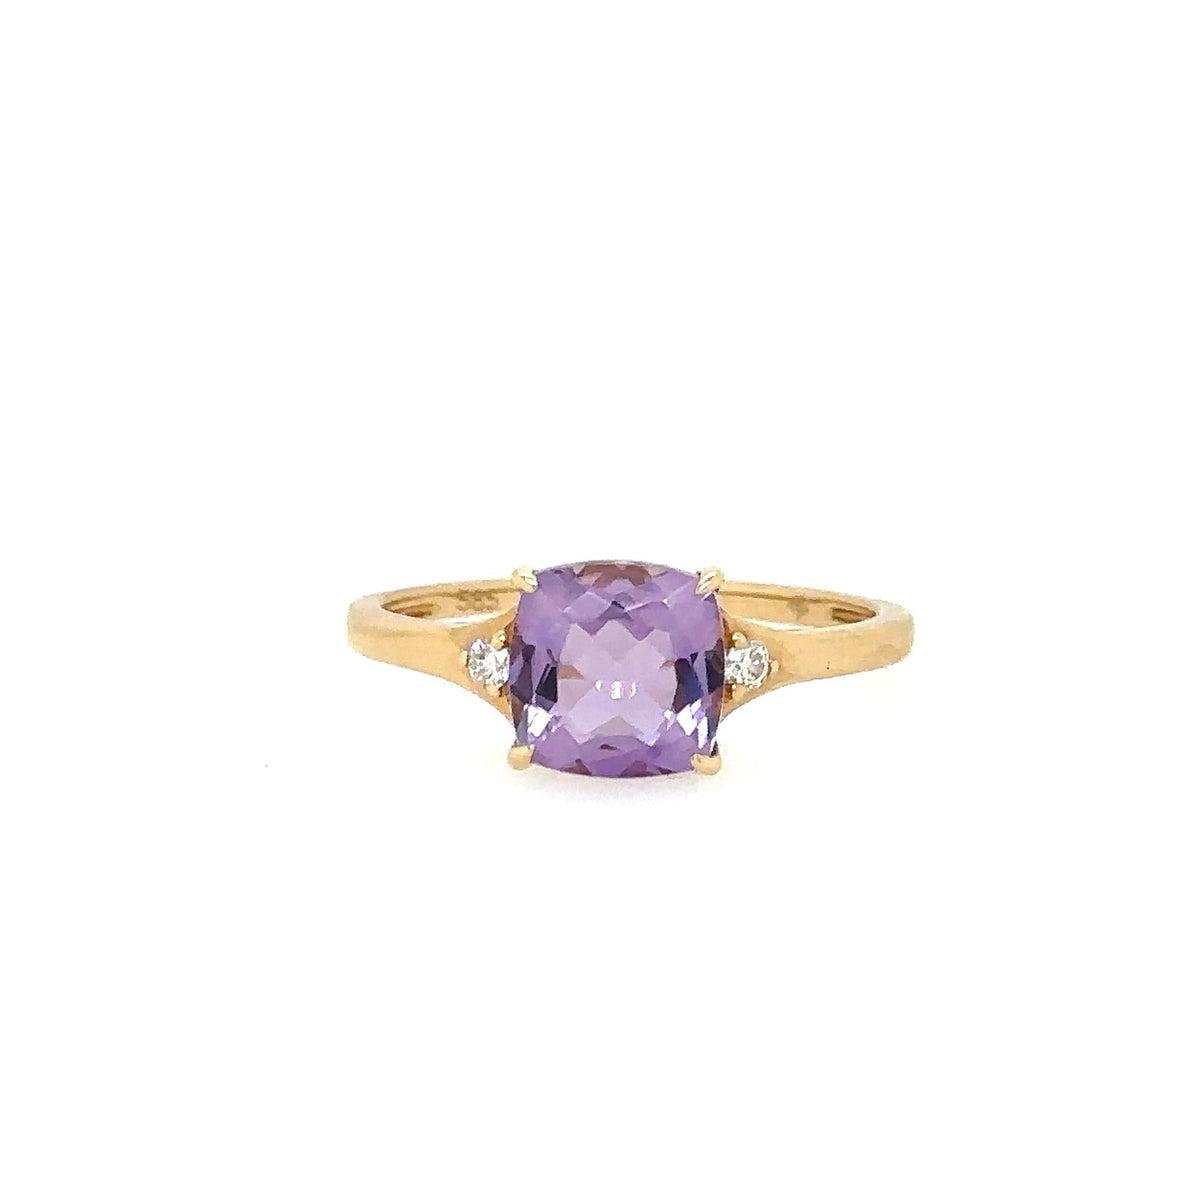 14Kt Yellow Gold 3 Stone Gemstone Ring With 1.43ct Amethyst